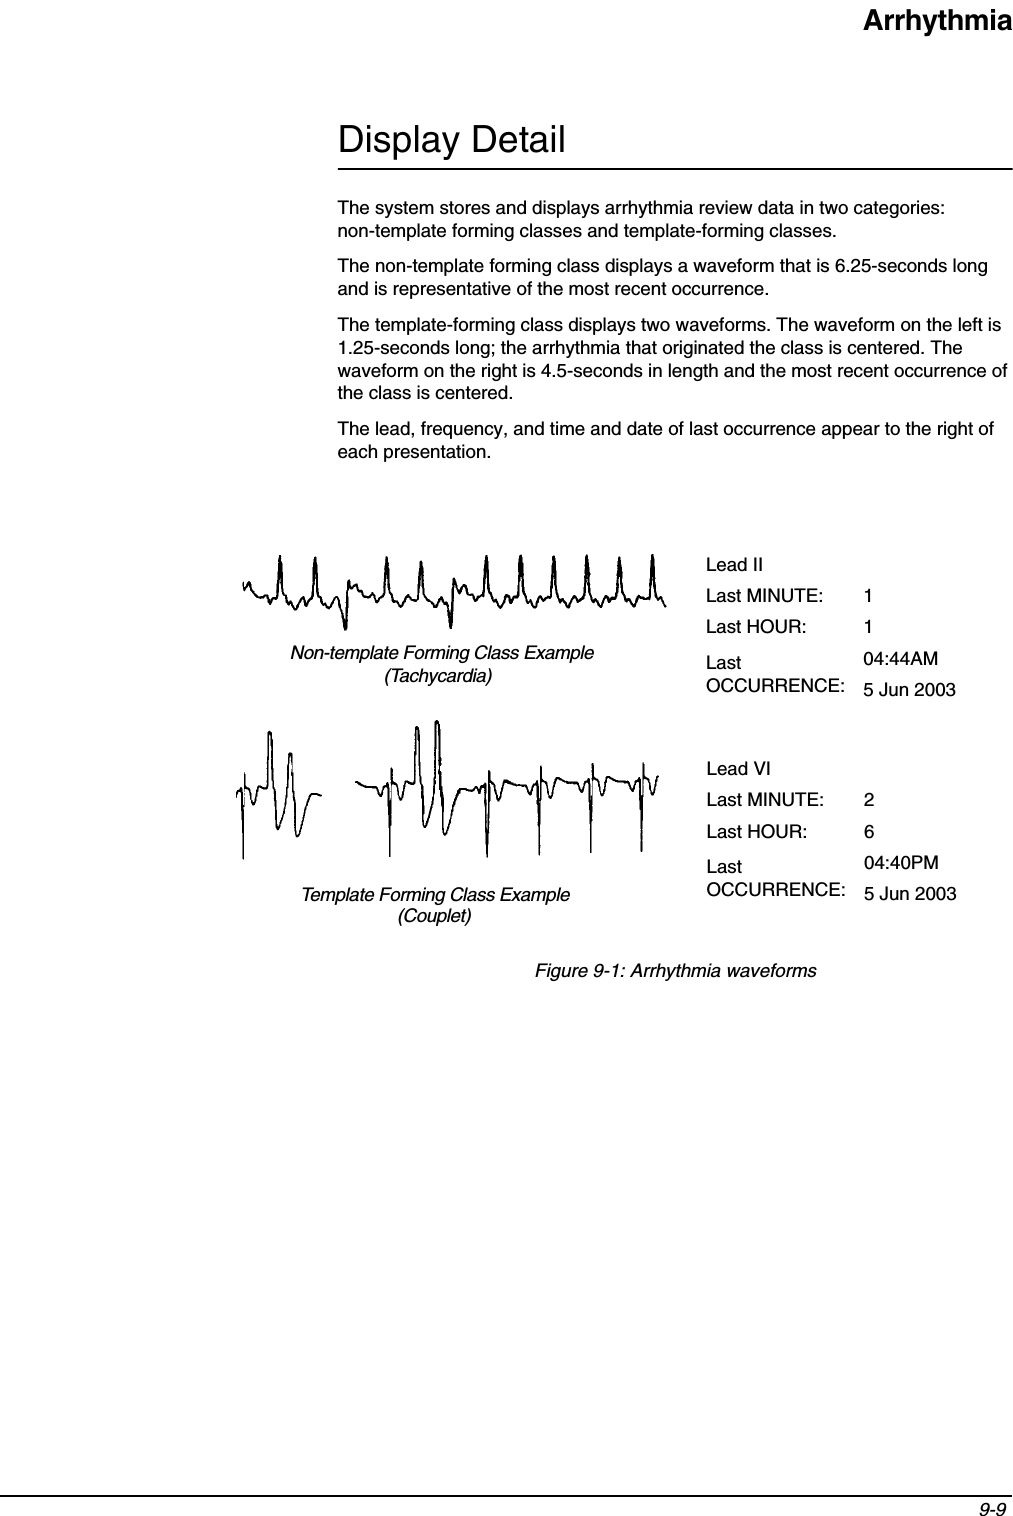 Arrhythmia9-9 Display DetailThe system stores and displays arrhythmia review data in two categories: non-template forming classes and template-forming classes.The non-template forming class displays a waveform that is 6.25-seconds long and is representative of the most recent occurrence.The template-forming class displays two waveforms. The waveform on the left is 1.25-seconds long; the arrhythmia that originated the class is centered. The waveform on the right is 4.5-seconds in length and the most recent occurrence of the class is centered.The lead, frequency, and time and date of last occurrence appear to the right of each presentation.Figure 9-1: Arrhythmia waveformsNon-template Forming Class ExampleTemplate Forming Class ExampleLead IILast MINUTE: 1Last HOUR: 1Last OCCURRENCE:04:44AM5 Jun 2003Lead VILast MINUTE: 2Last HOUR: 6Last OCCURRENCE:04:40PM5 Jun 2003(Tachycardia)(Couplet)